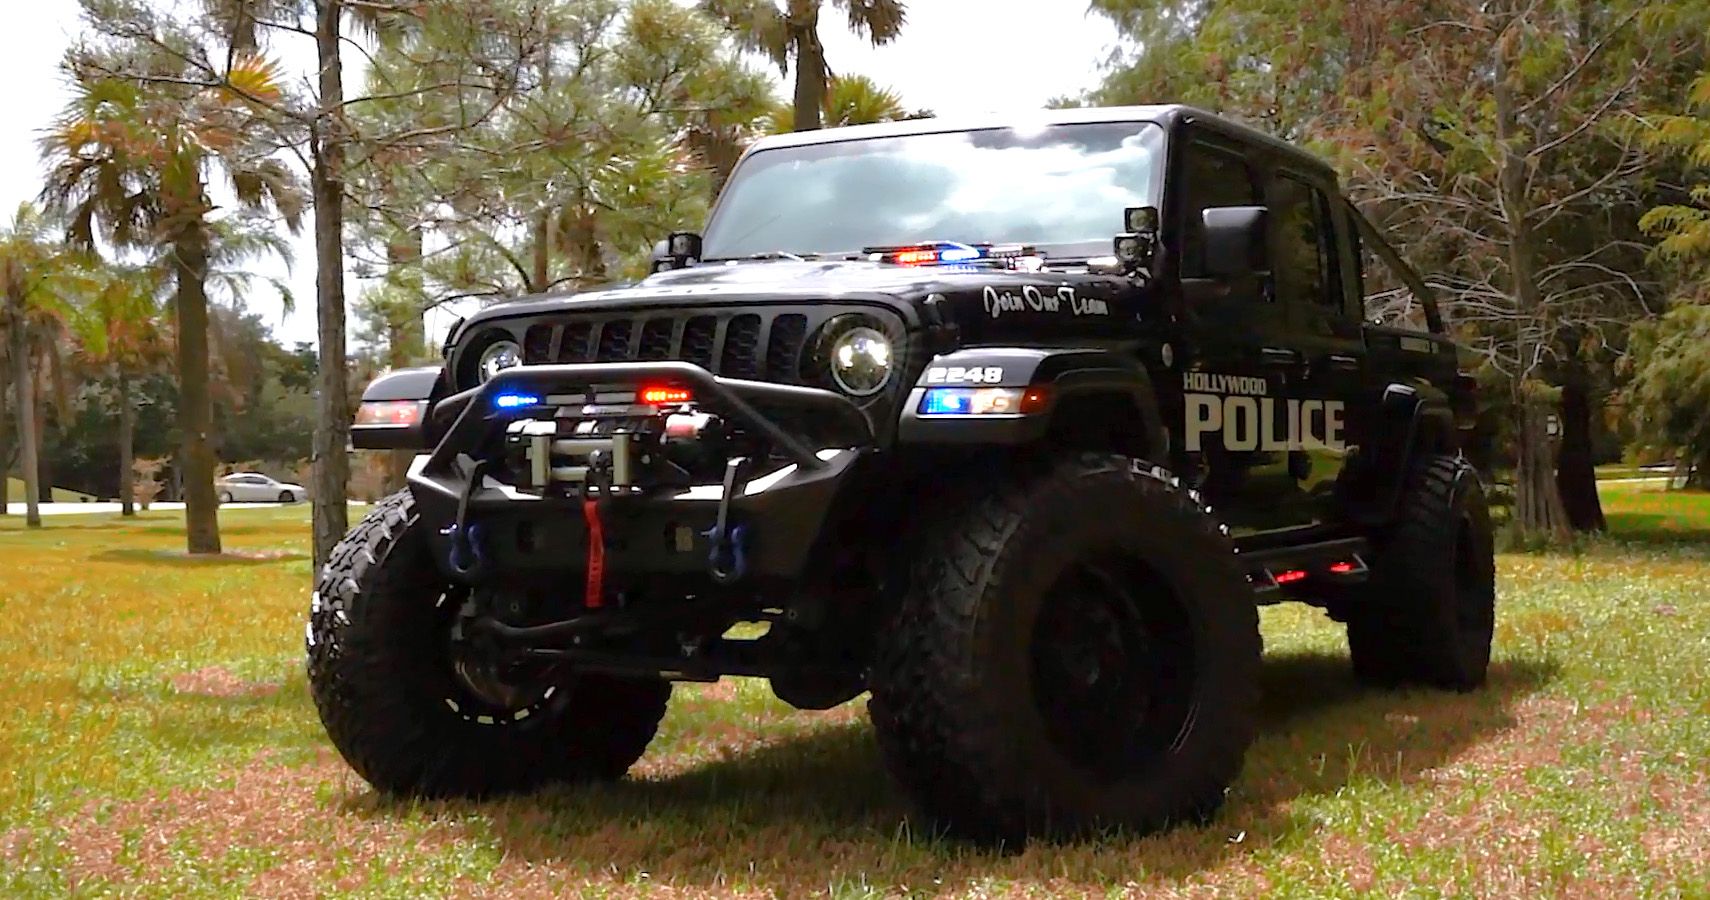 SoFlo Police Jeep parked on lawn